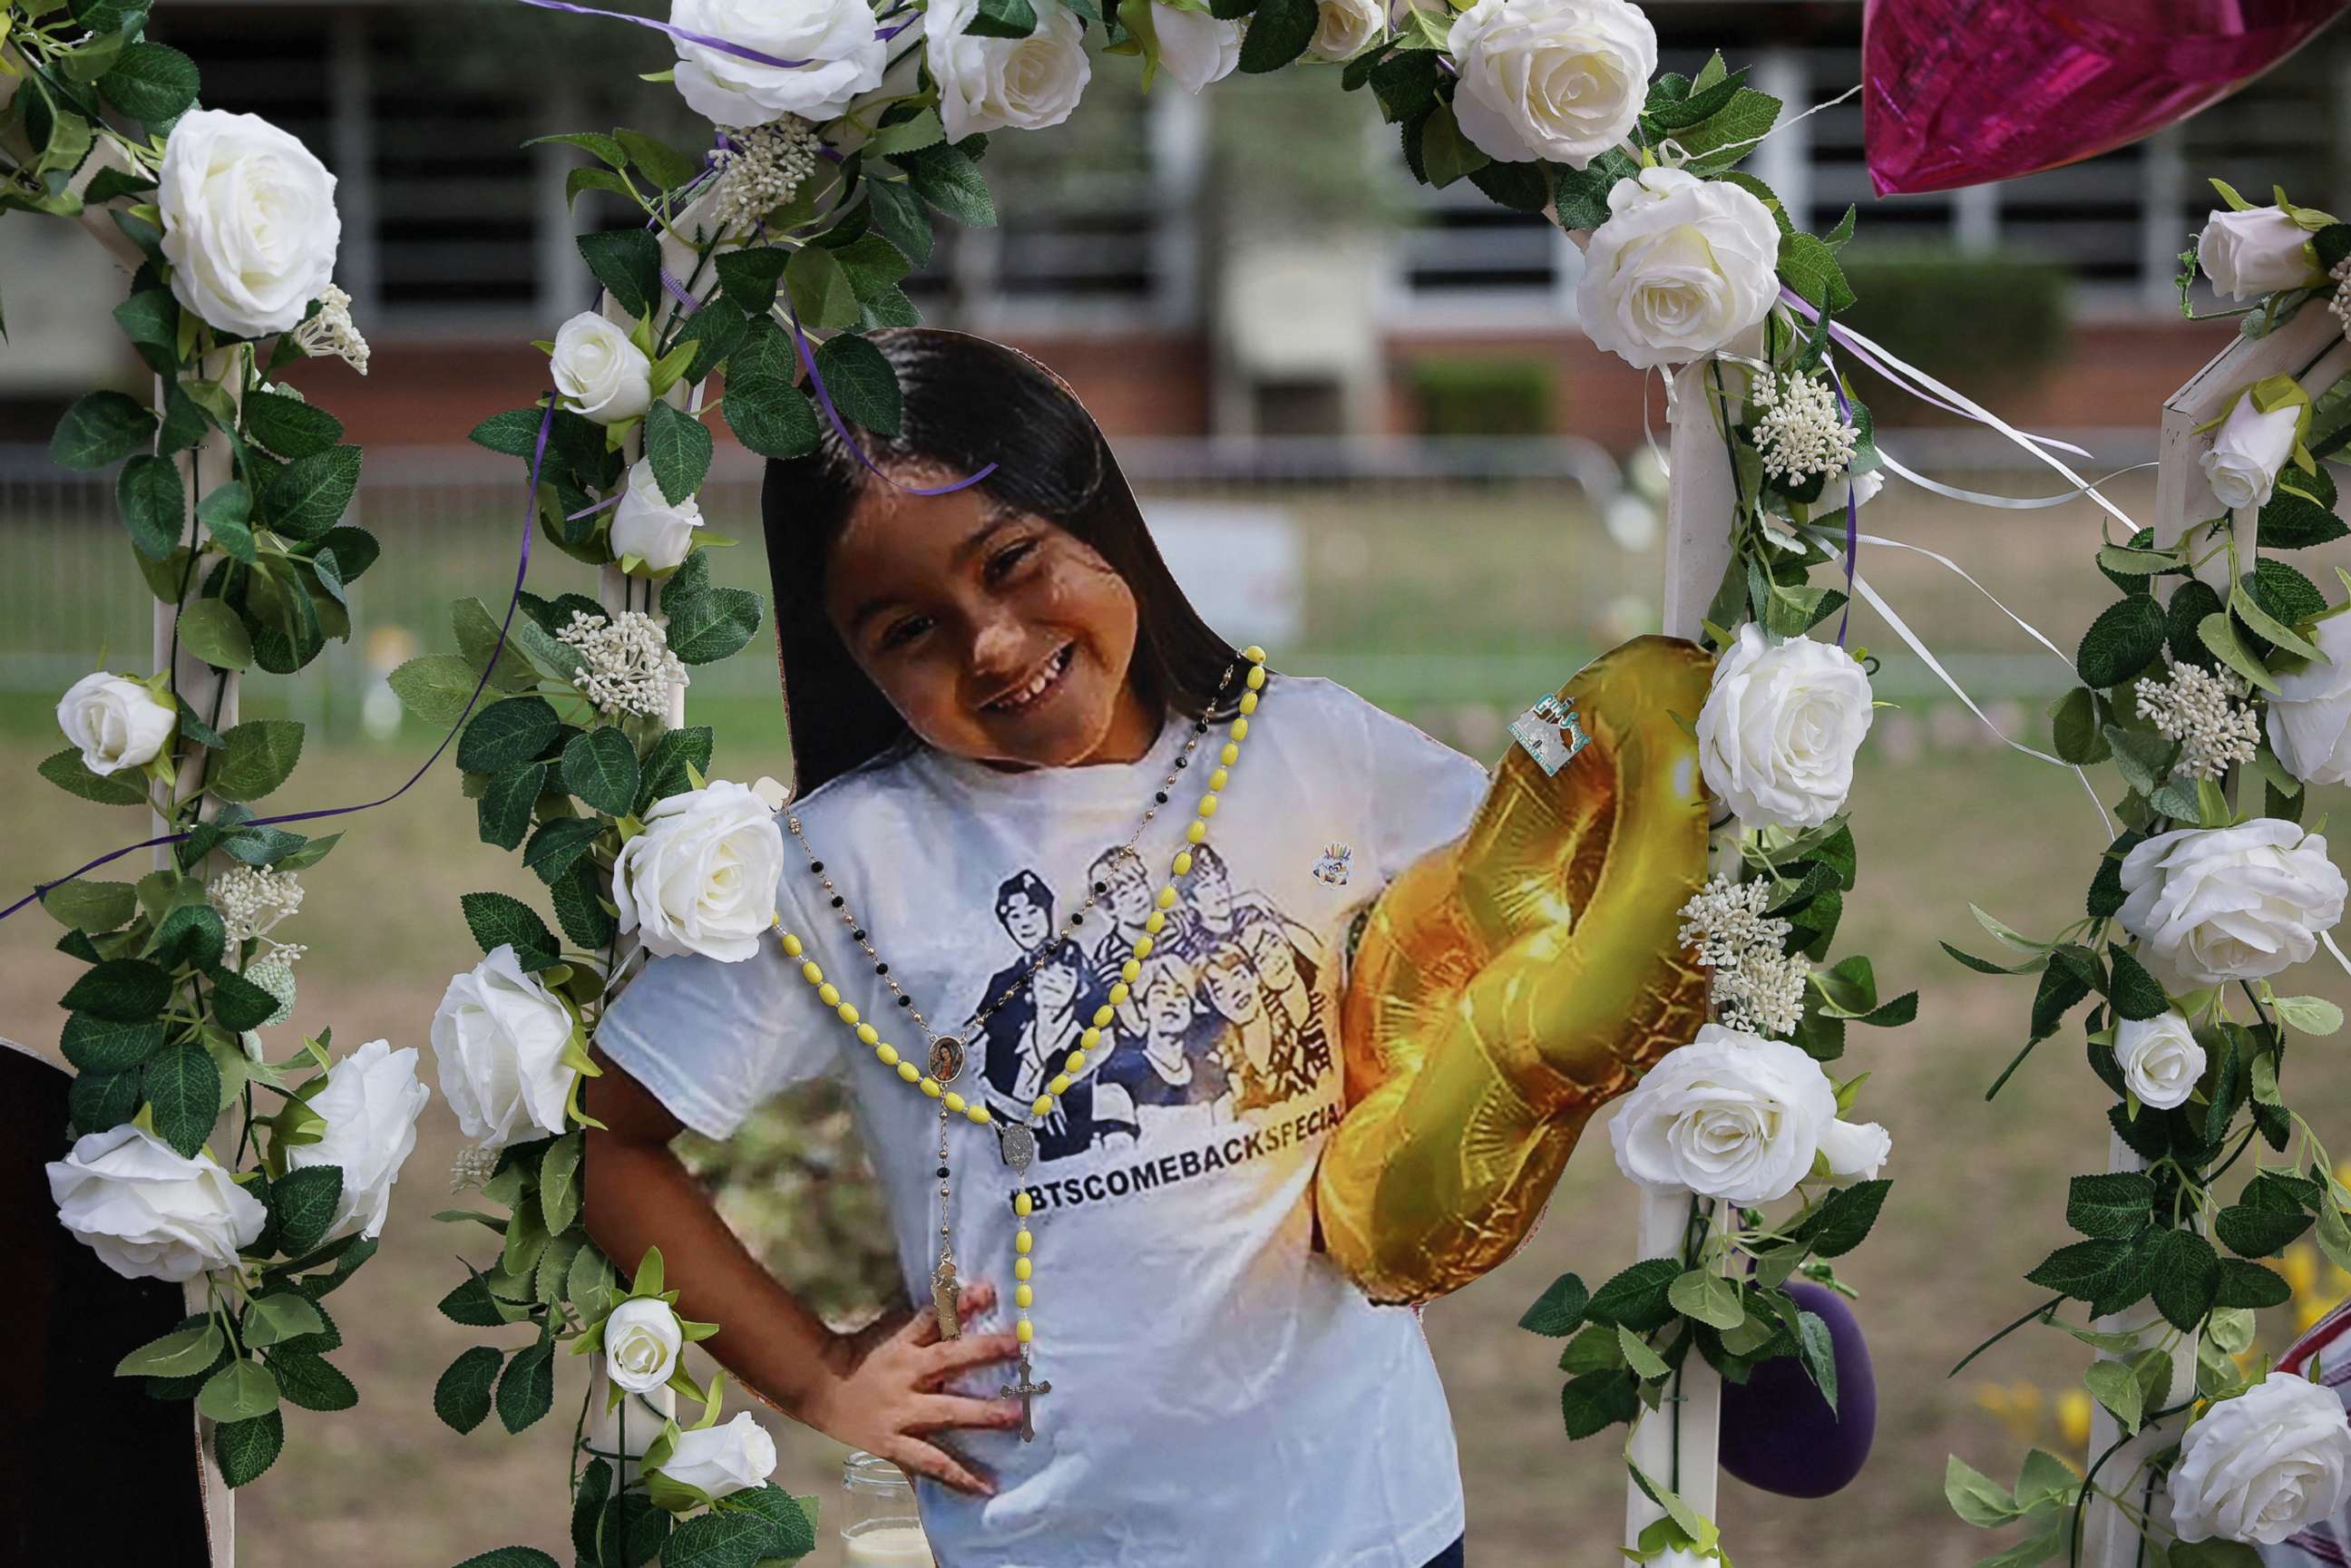 PHOTO: A photo cutout of Amerie Jo Garza, one of the 19 children killed victims in the Robb Elementary school shooting, is seen at school memorial site on the day of her funeral in Uvalde, Texas, May 31, 2022.